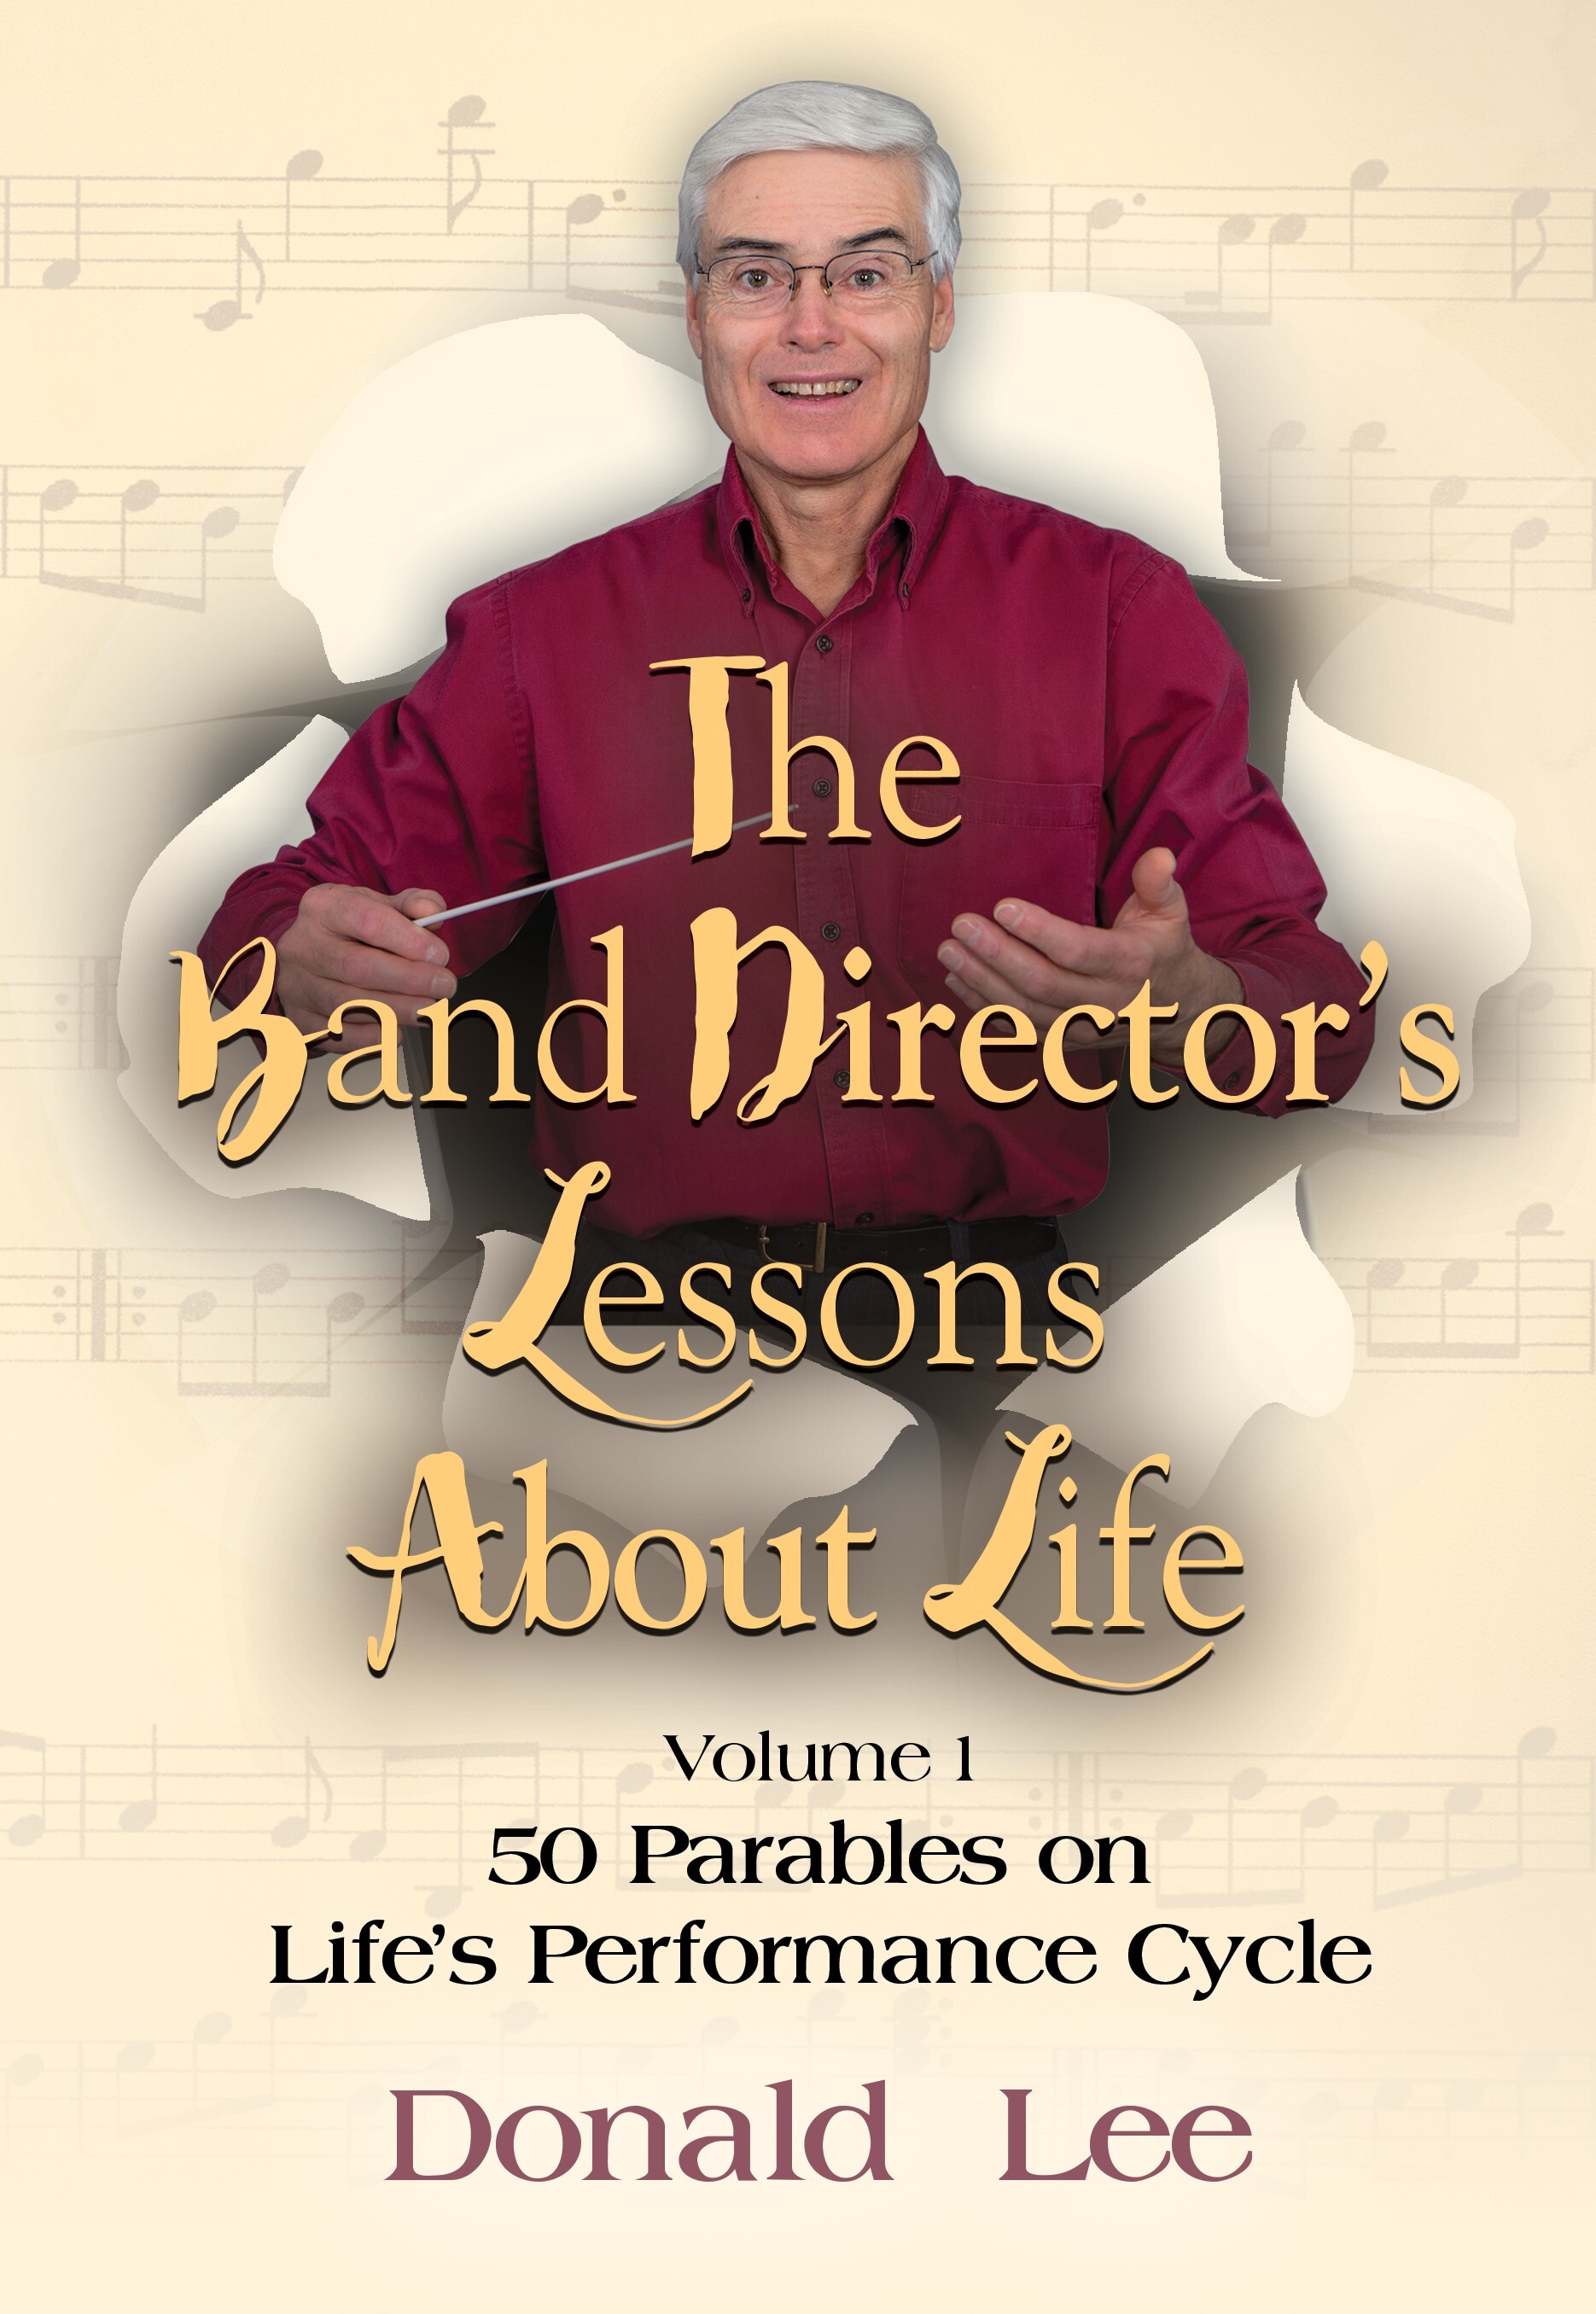 The_Band_Director_s_Lessons_About_Life_Book_Cover_medium_resolution_600_kb.jpg